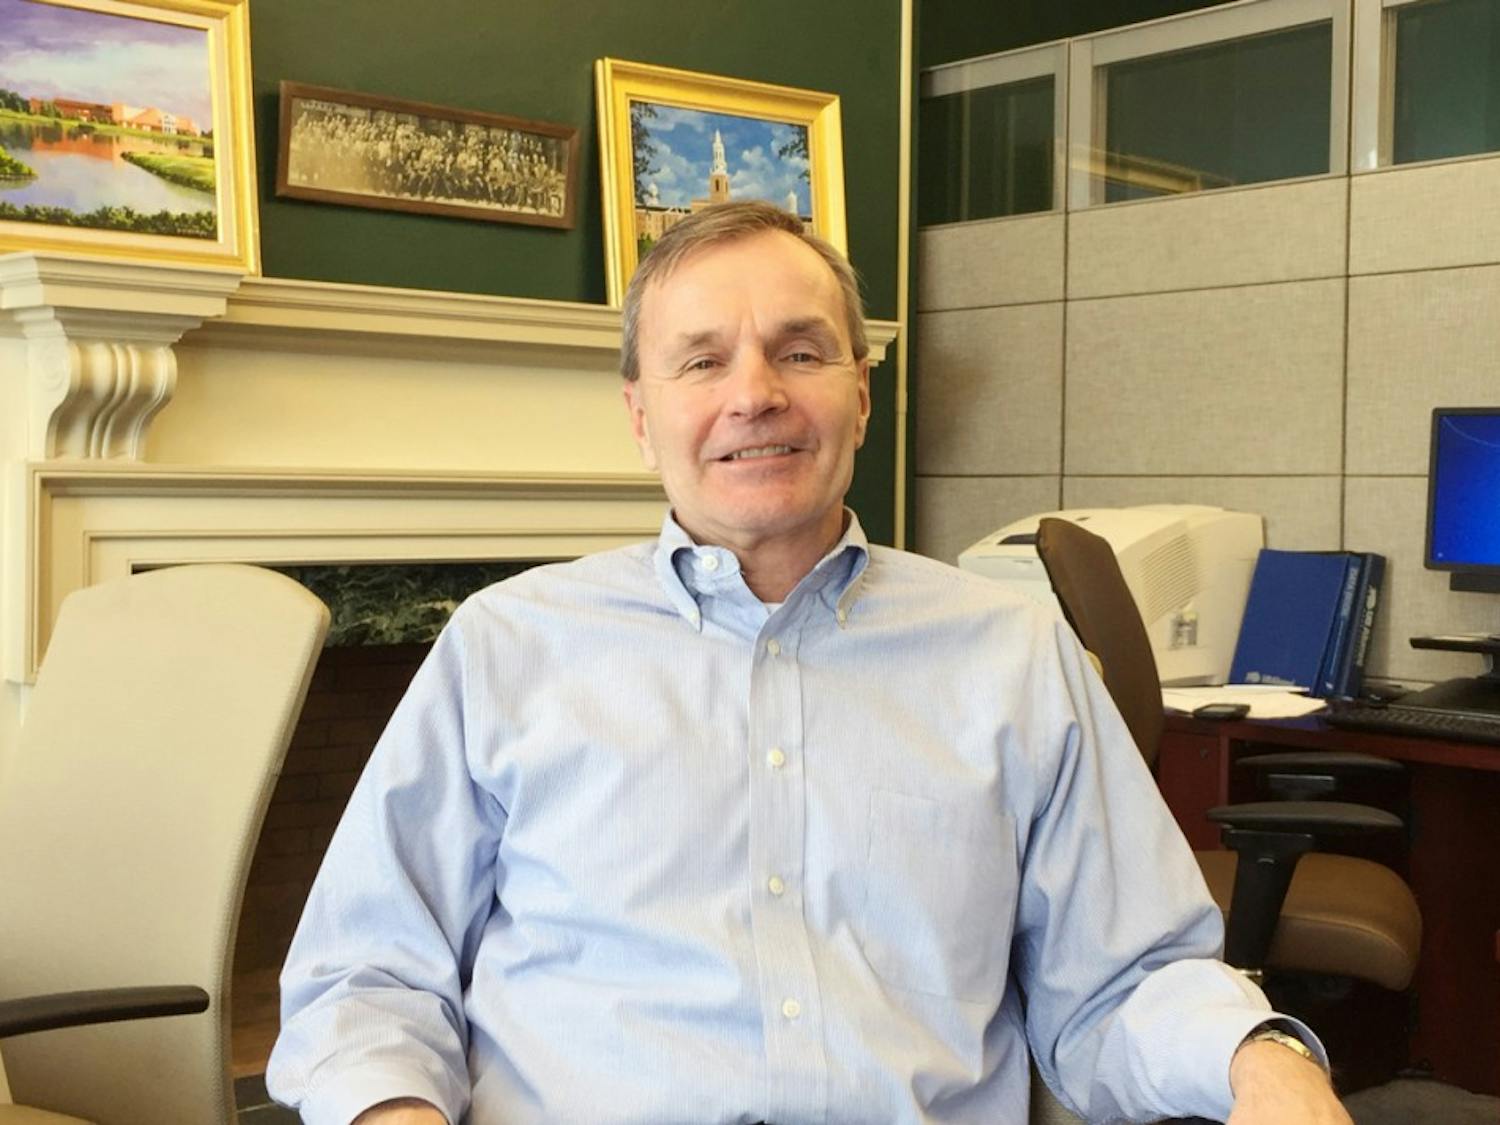 Executive Director at the Office of Alumni Larry Zielinski said UB is working on an initiative to keep alumni more connected to the university after graduation.